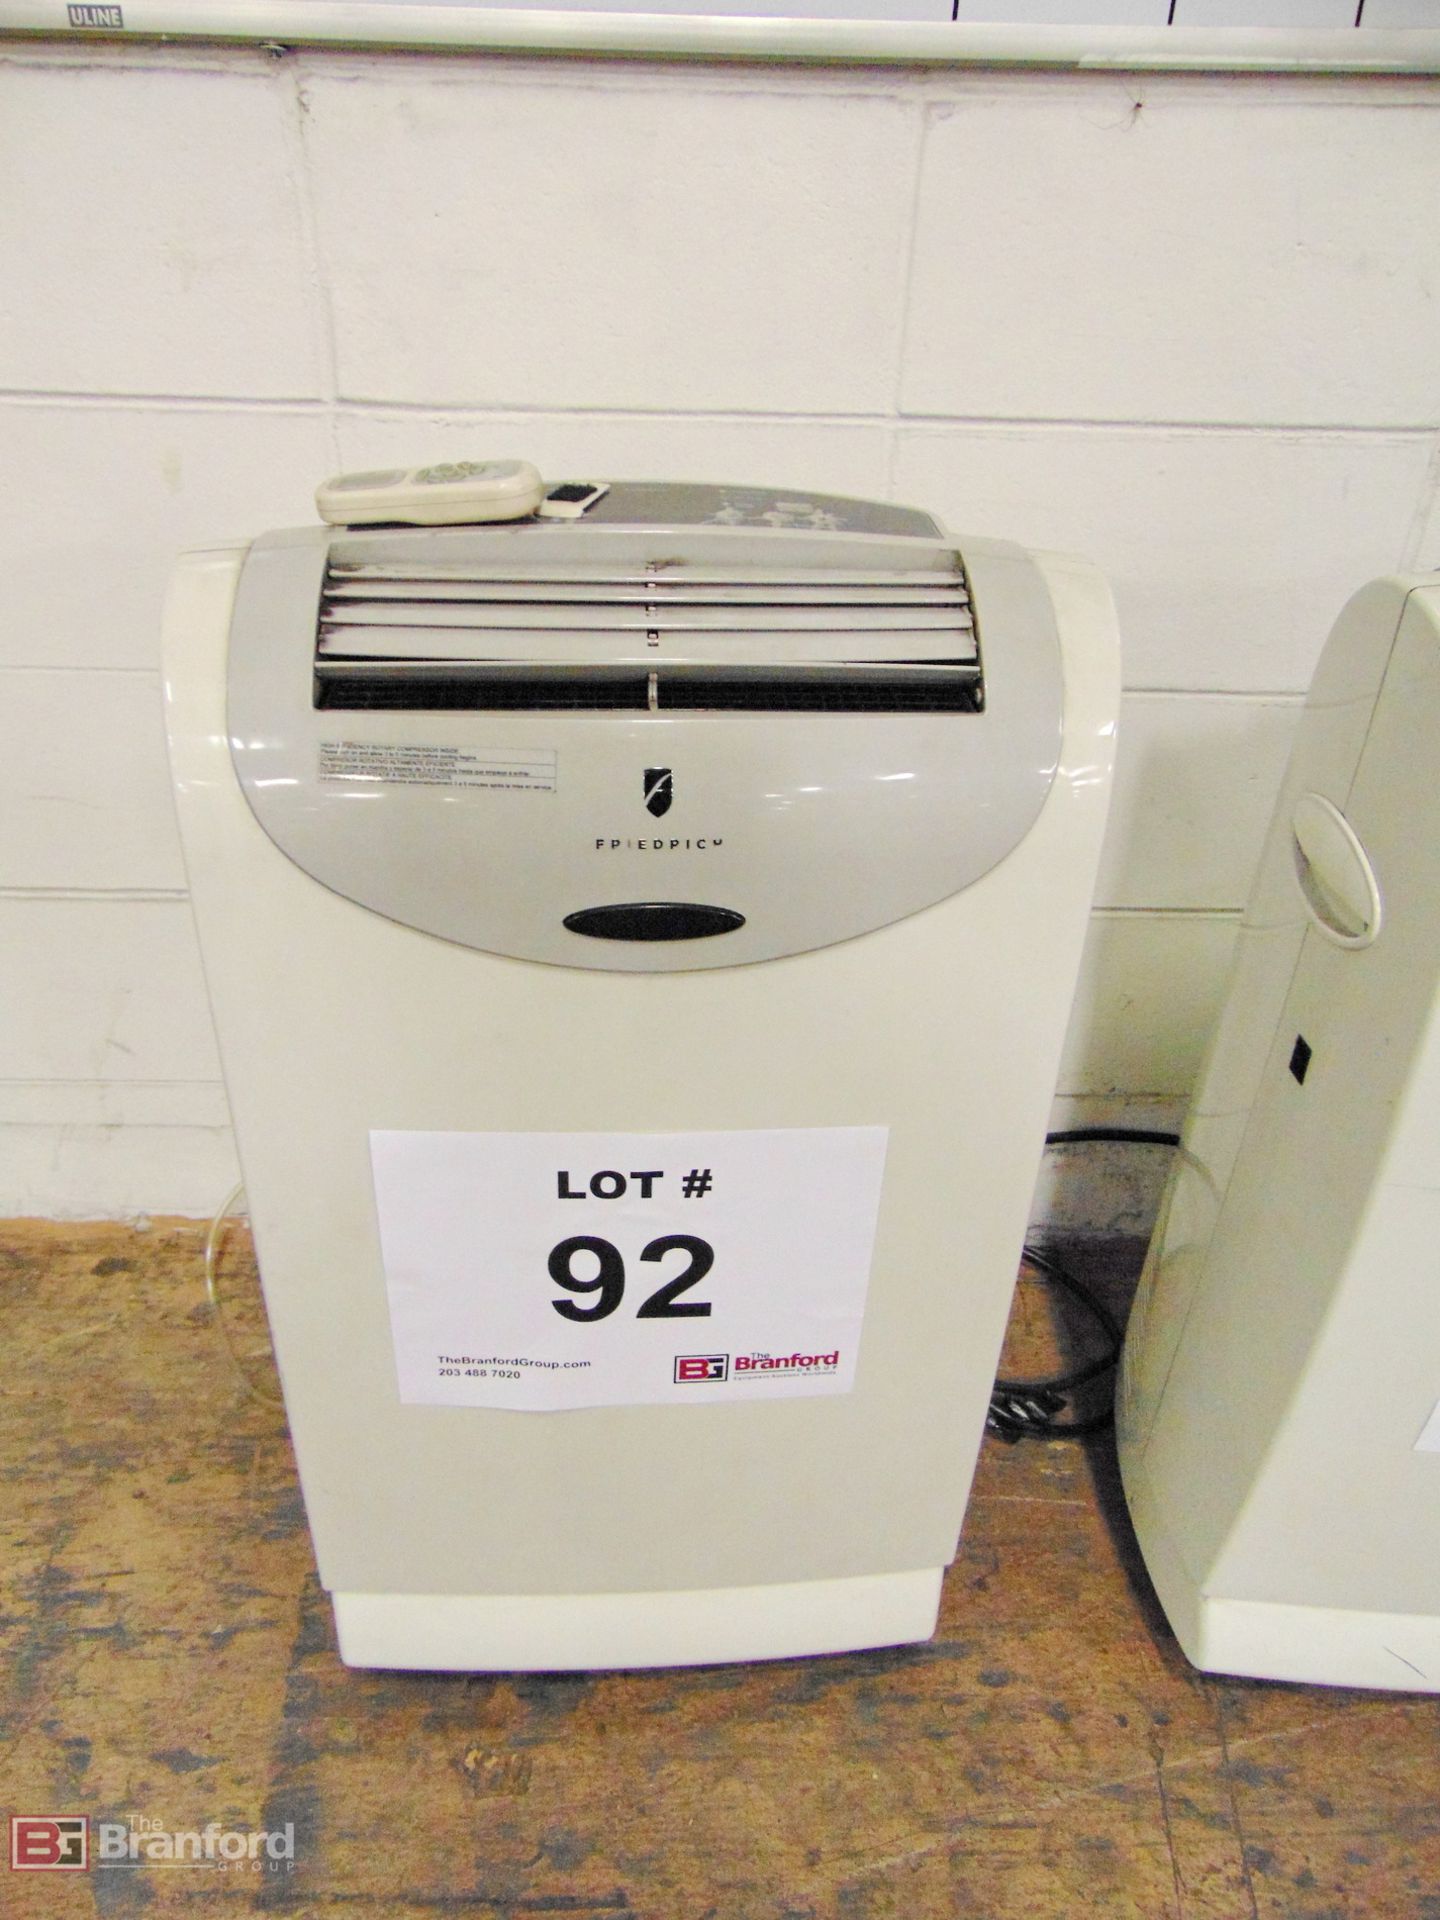 (2) Fpiedpicl portable air conditioning units